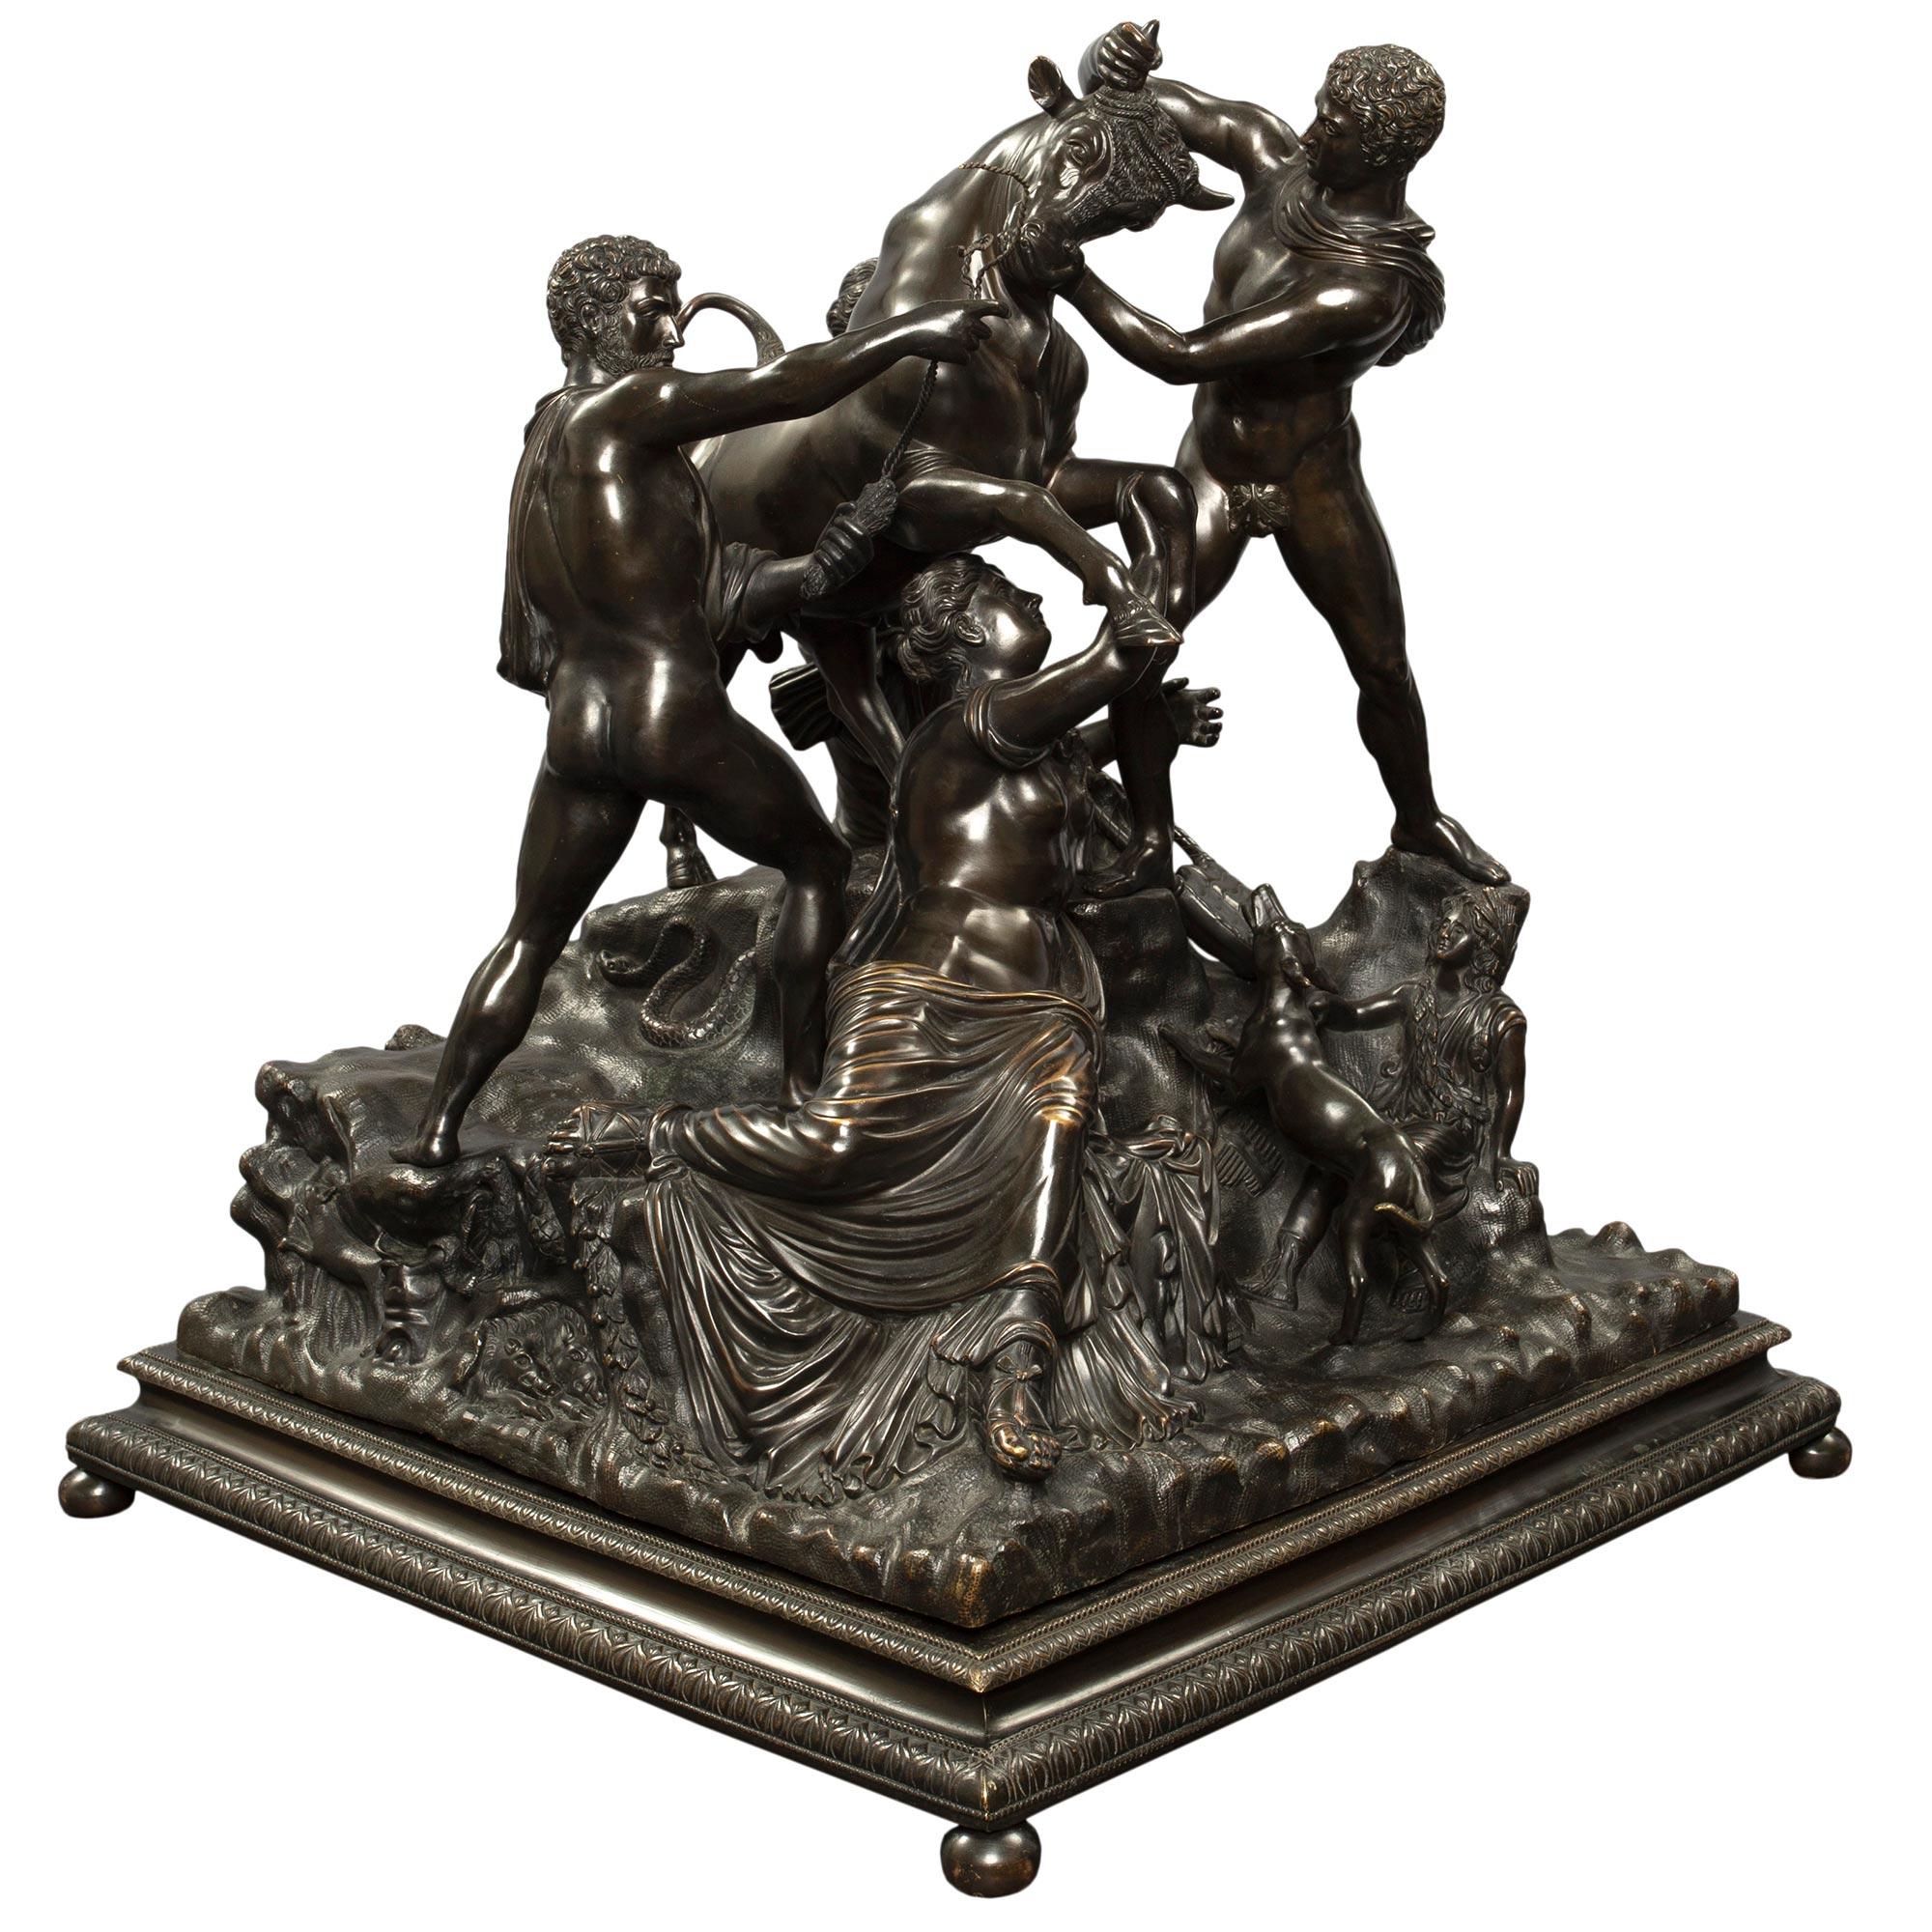 A most handsome and large scale Italian mid 19th century patinated bronze statue of the Farnese Bull. The rich and warmly patinated bronze is raised by a square mottled support with a palmette designed border all above ball feet. The sculptural